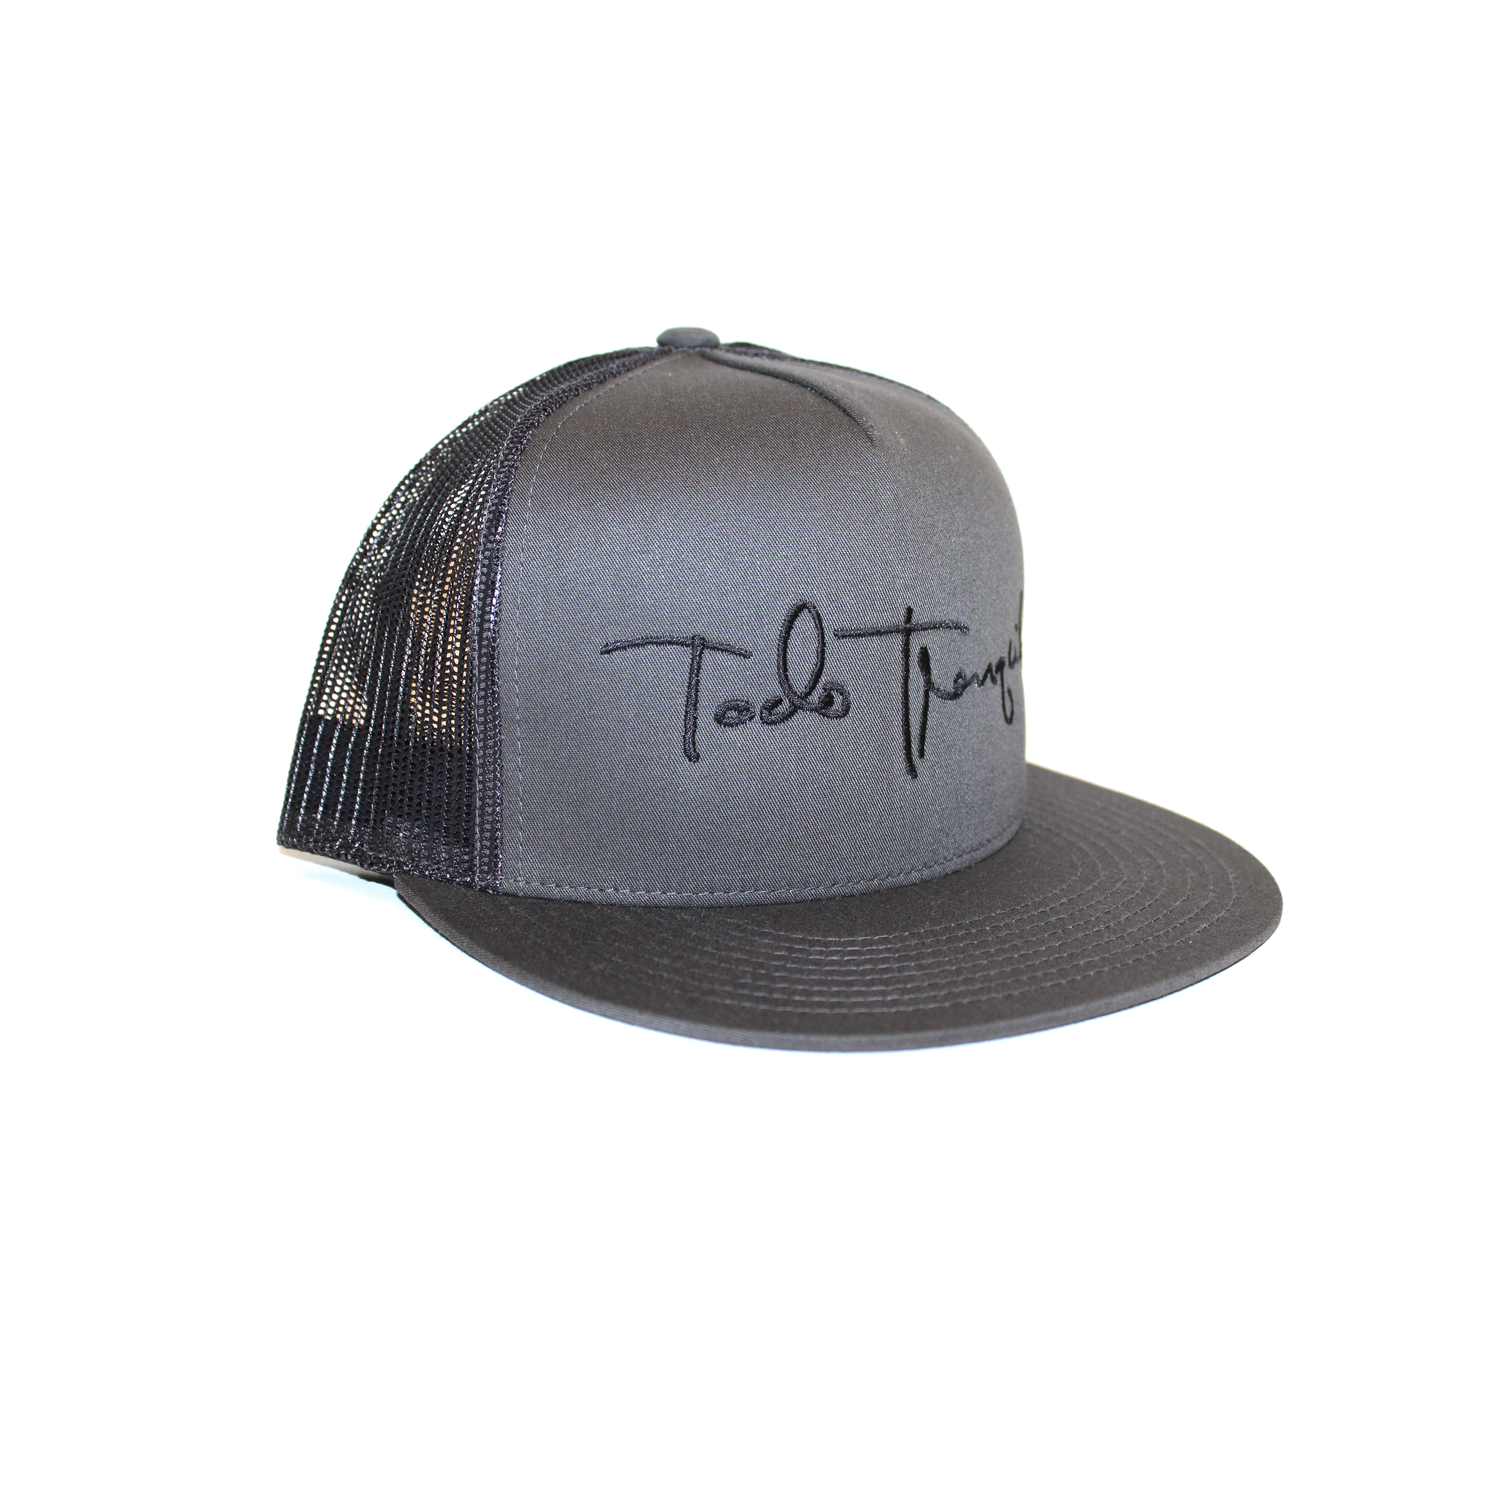 Signature Mesh Hat — TODO Modern TRANQUILO Ocean Inspired - By The Style